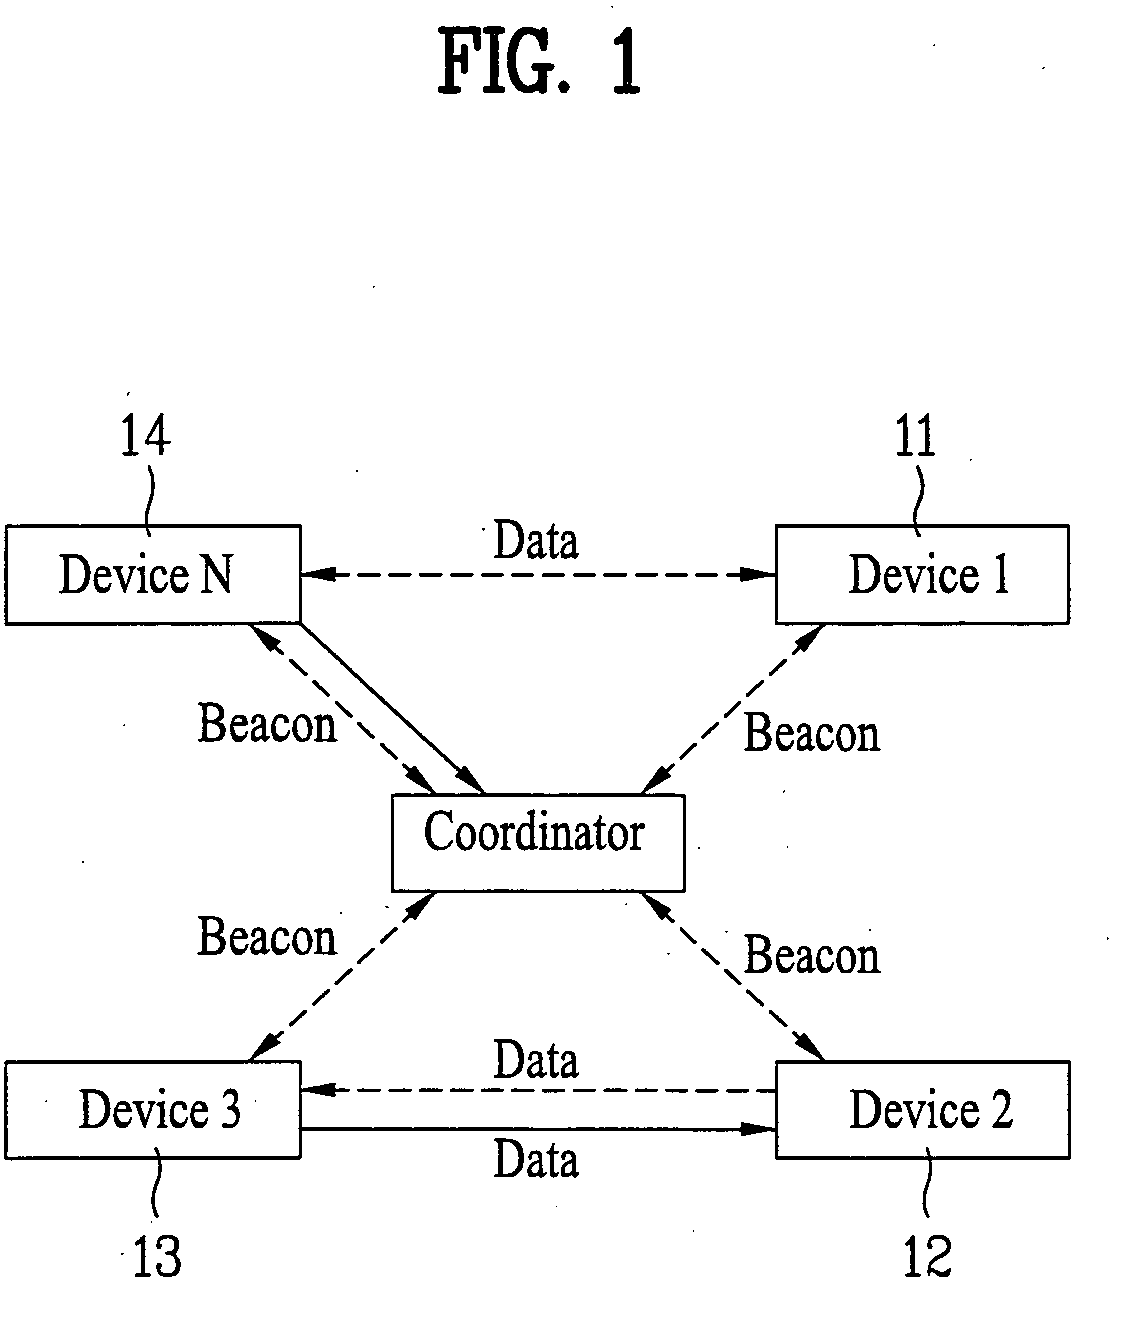 Method for managing the power in the wireless network